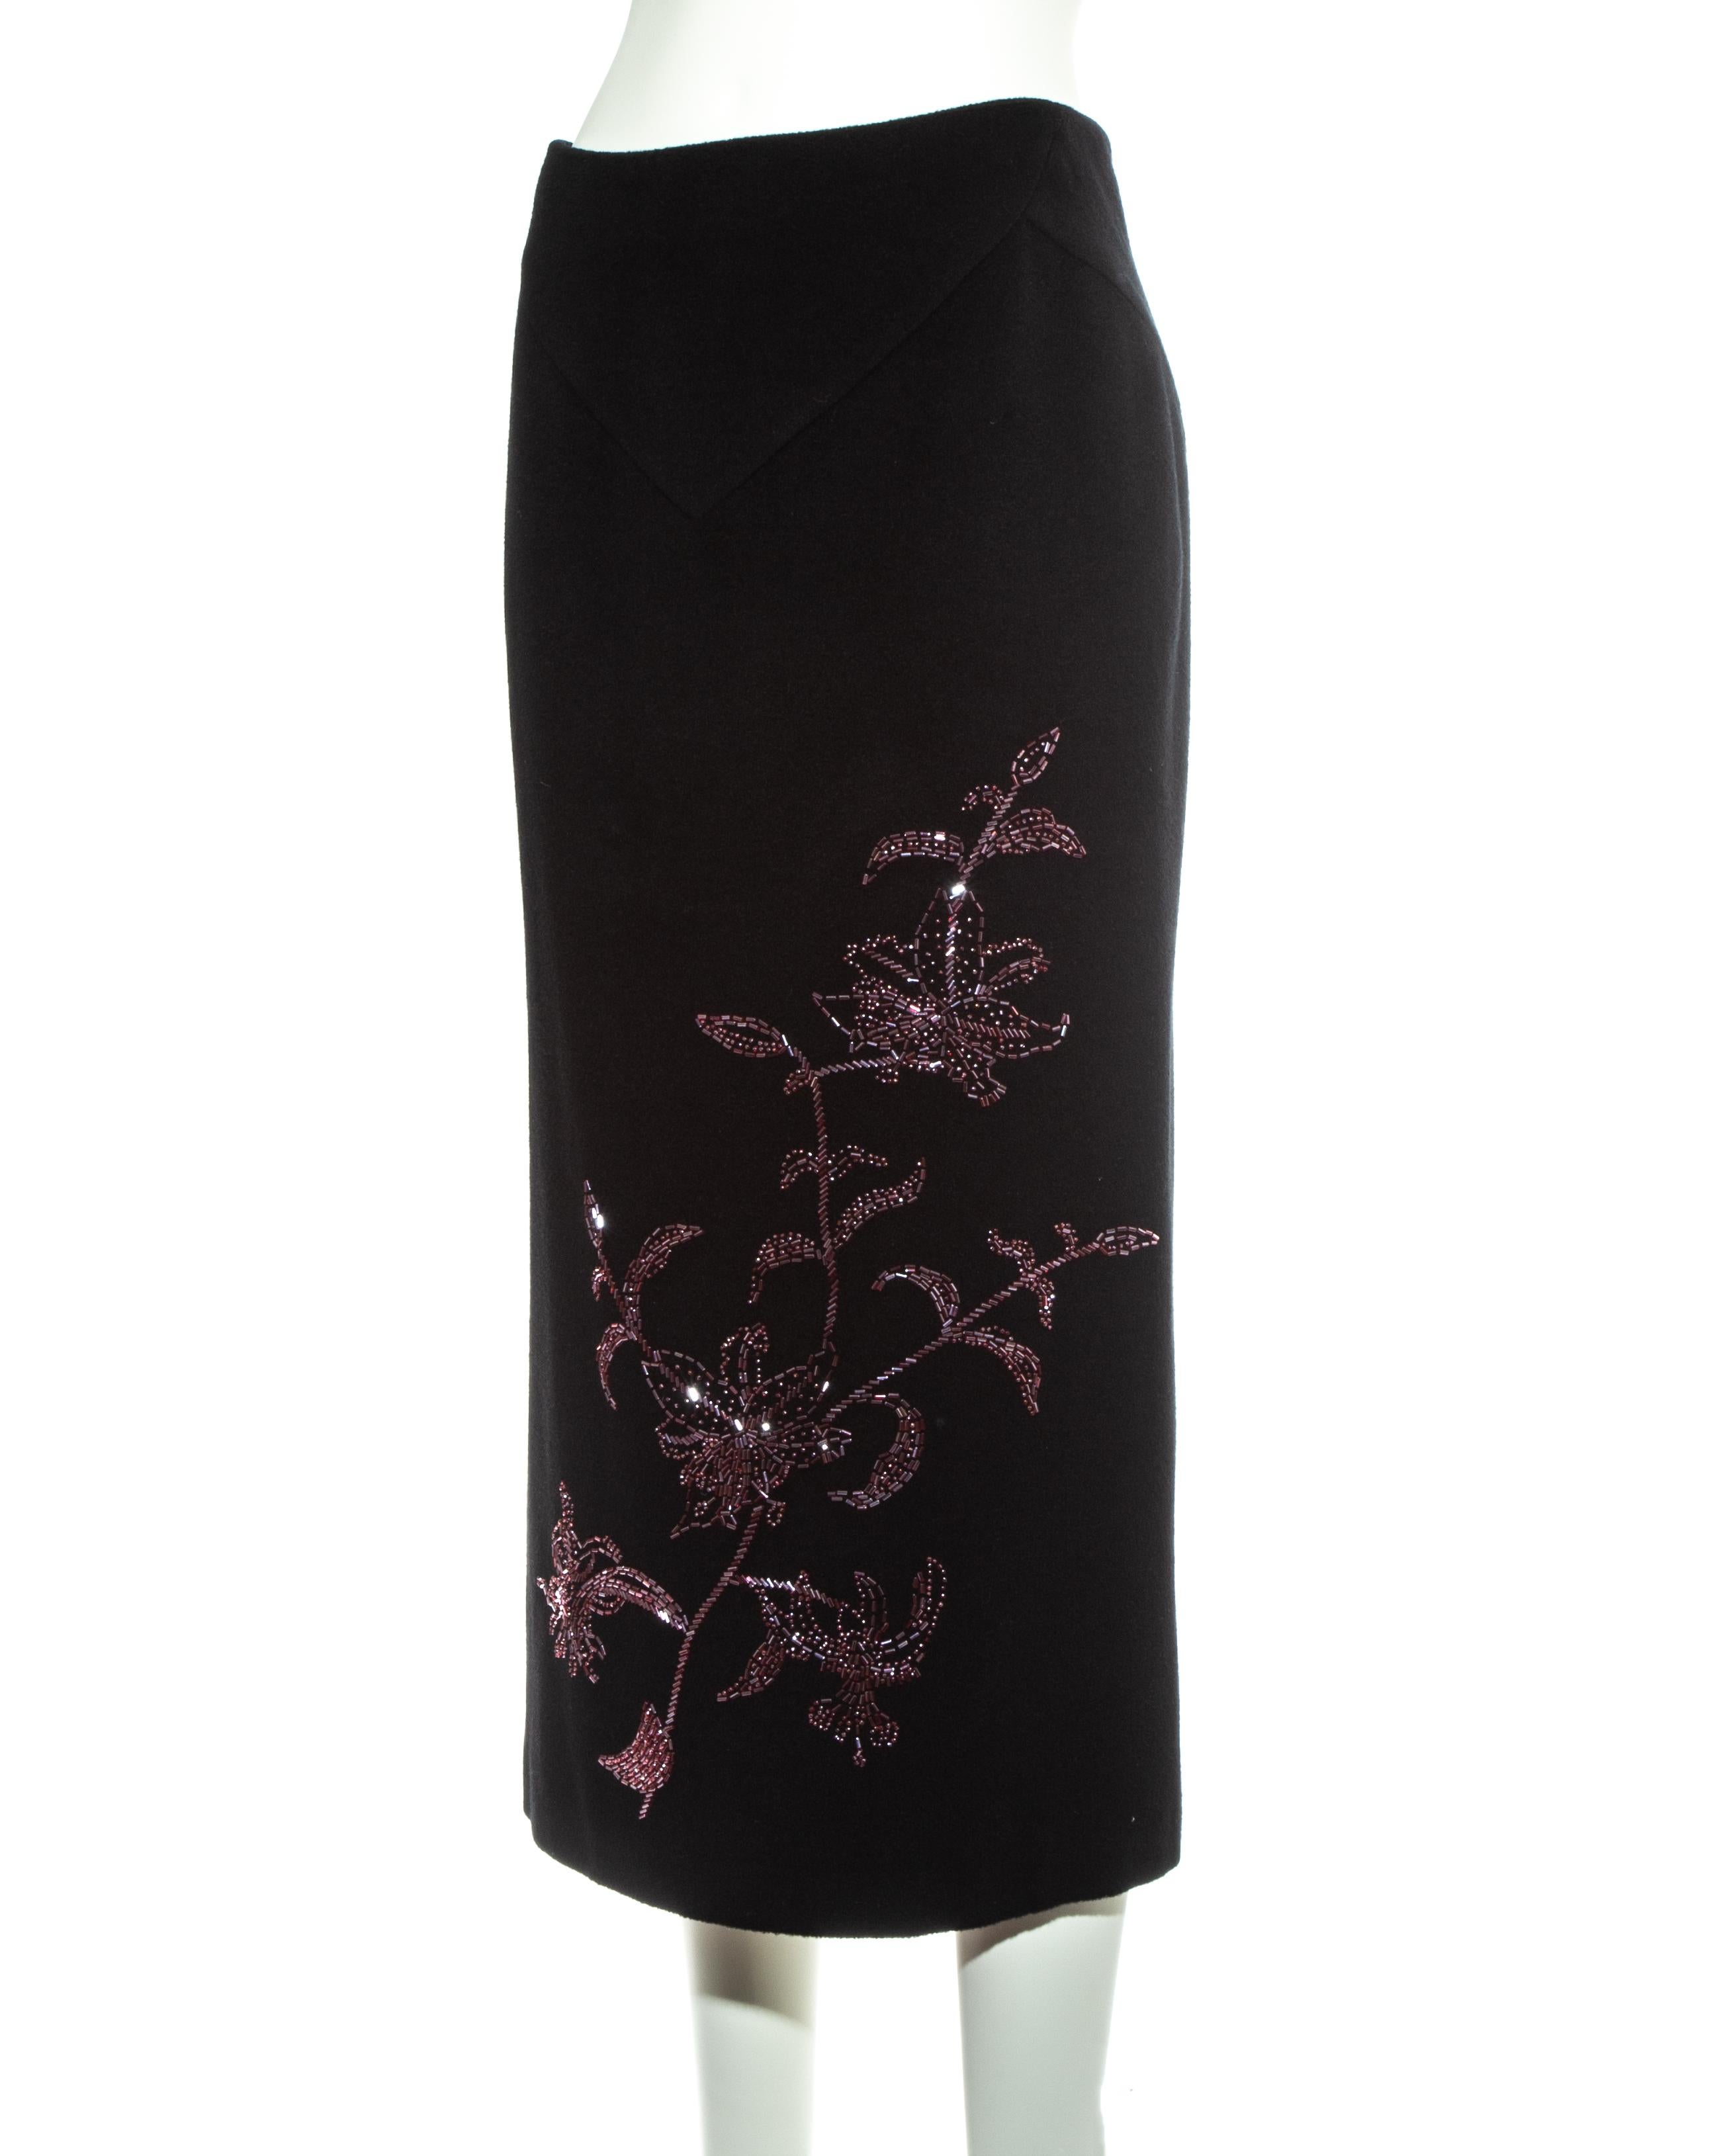 Black Alexander McQueen black cashmere pencil skirt with red floral beading, fw 1998